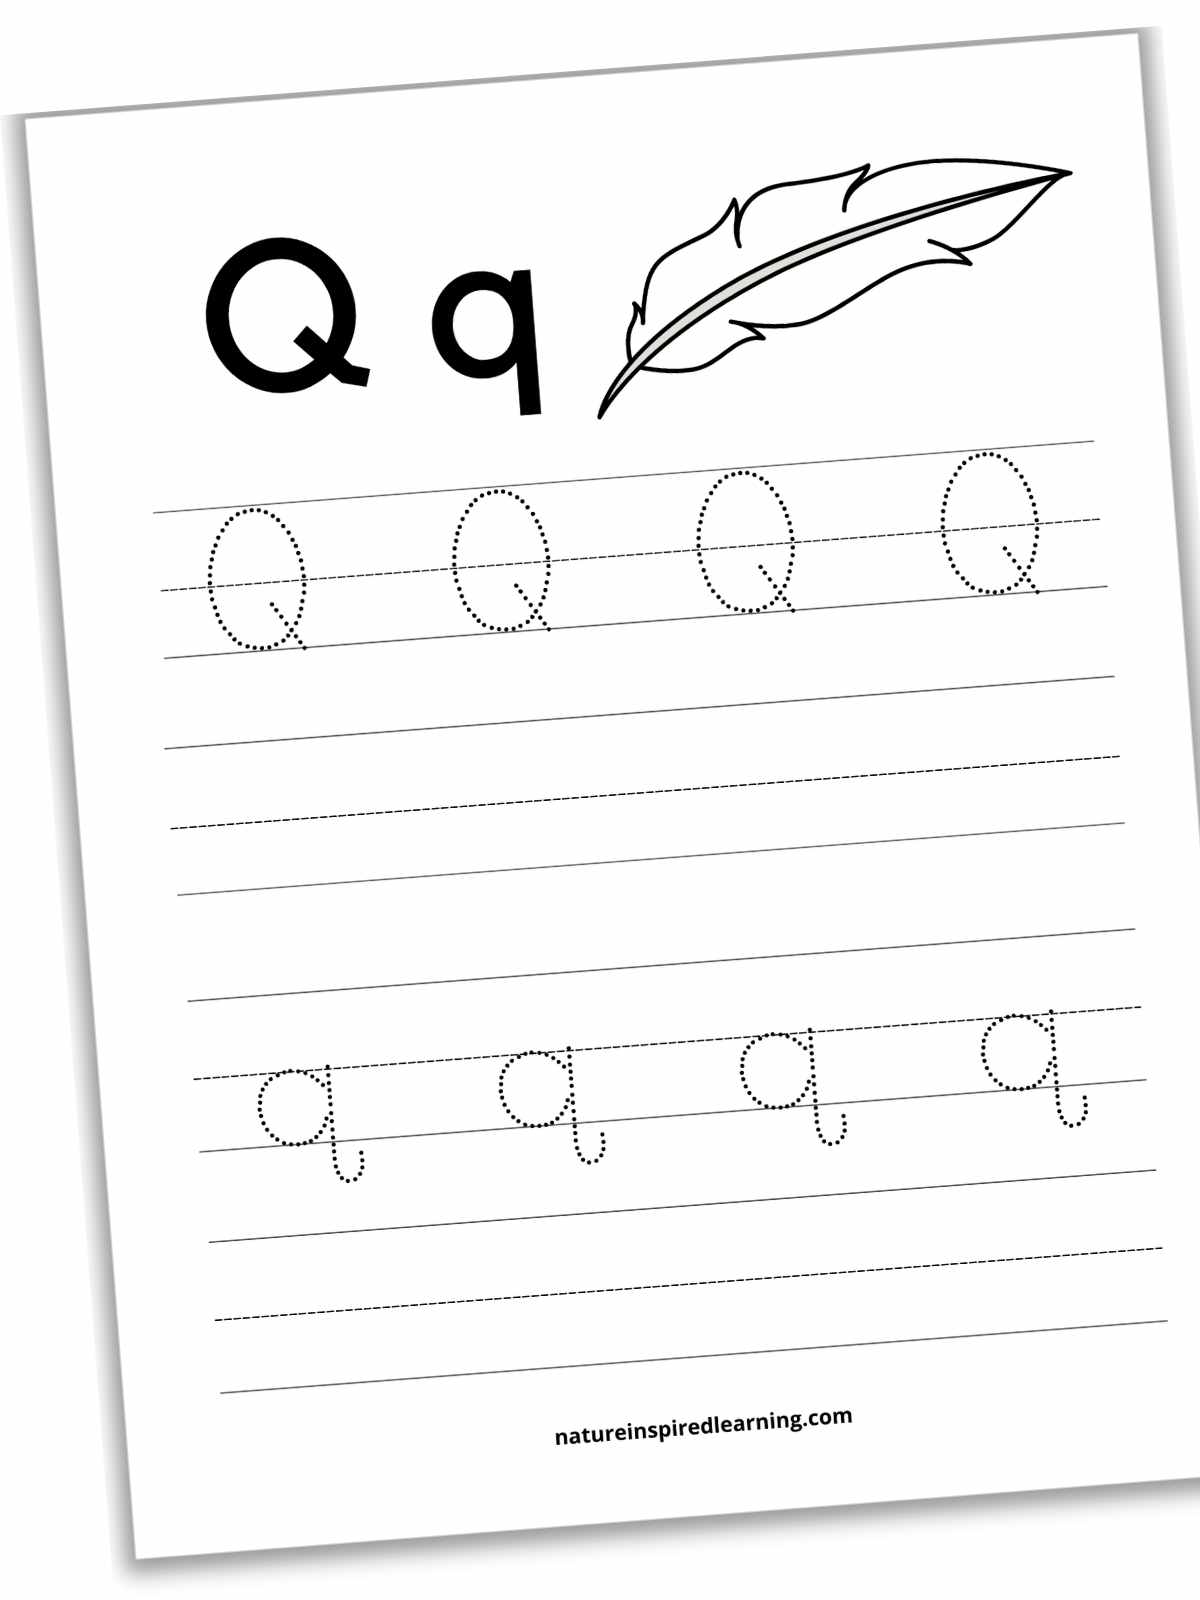 Worksheet with capital and lowercase Q's to trace, blank lines and a black and white quill at the top